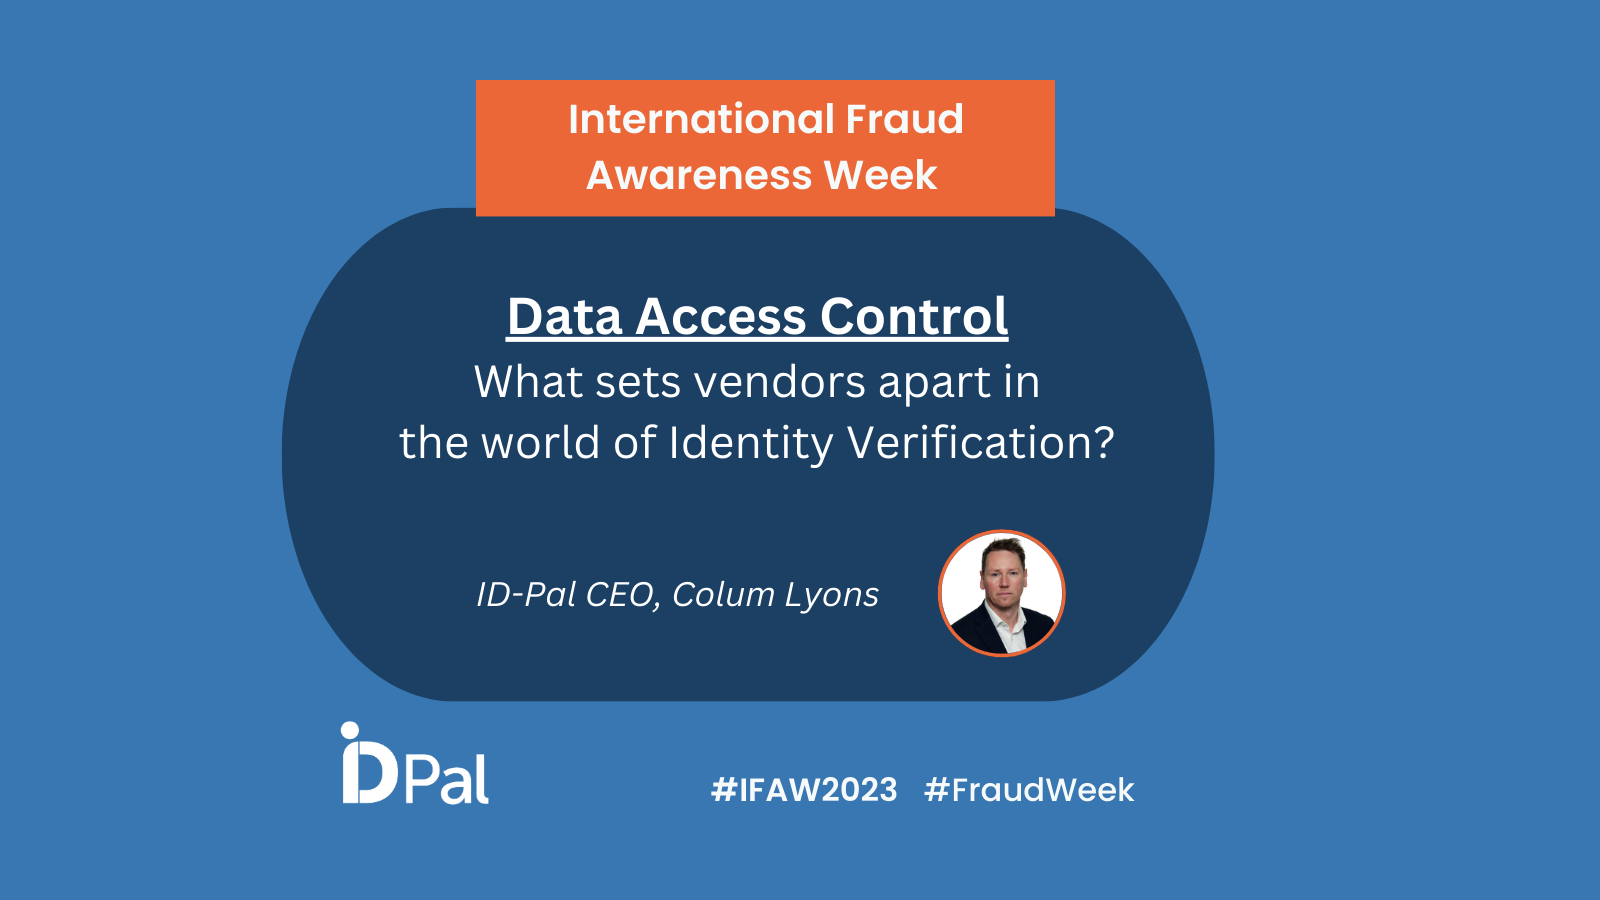 Data Access Control: What sets vendors apart in the world of Identity Verification? 